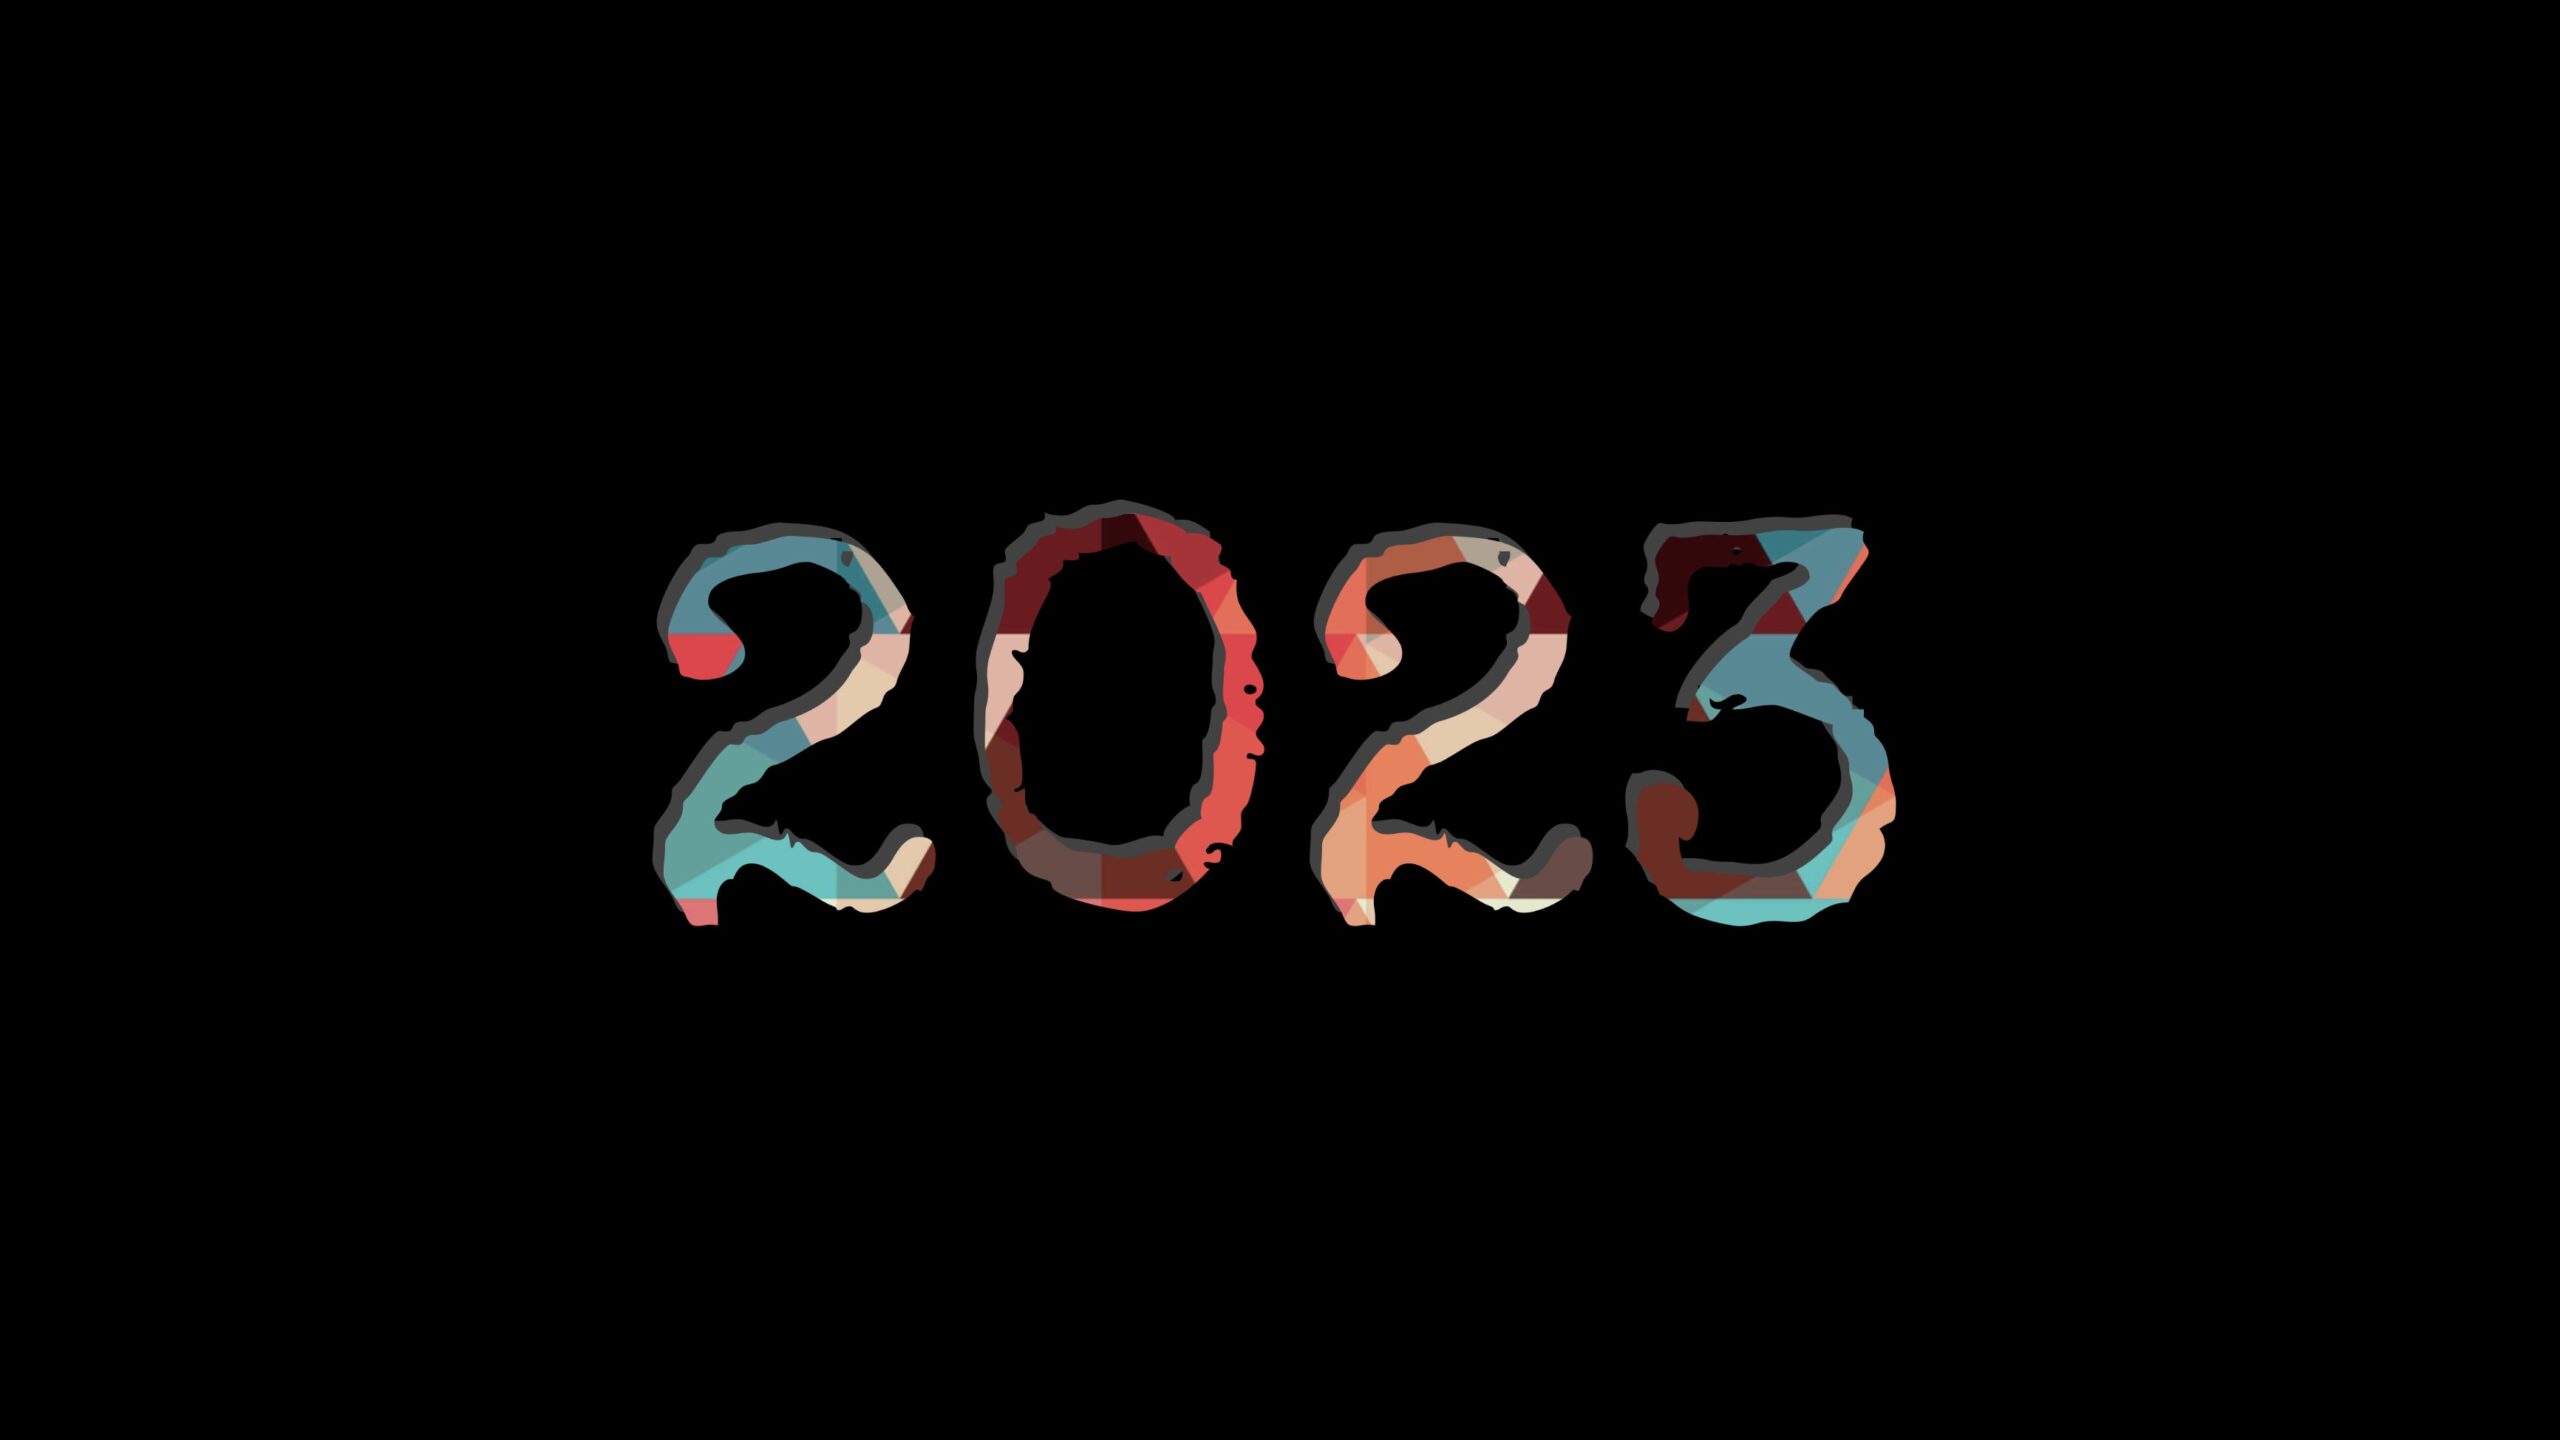 2023: New Year’s Resolution; 3840 x 2160